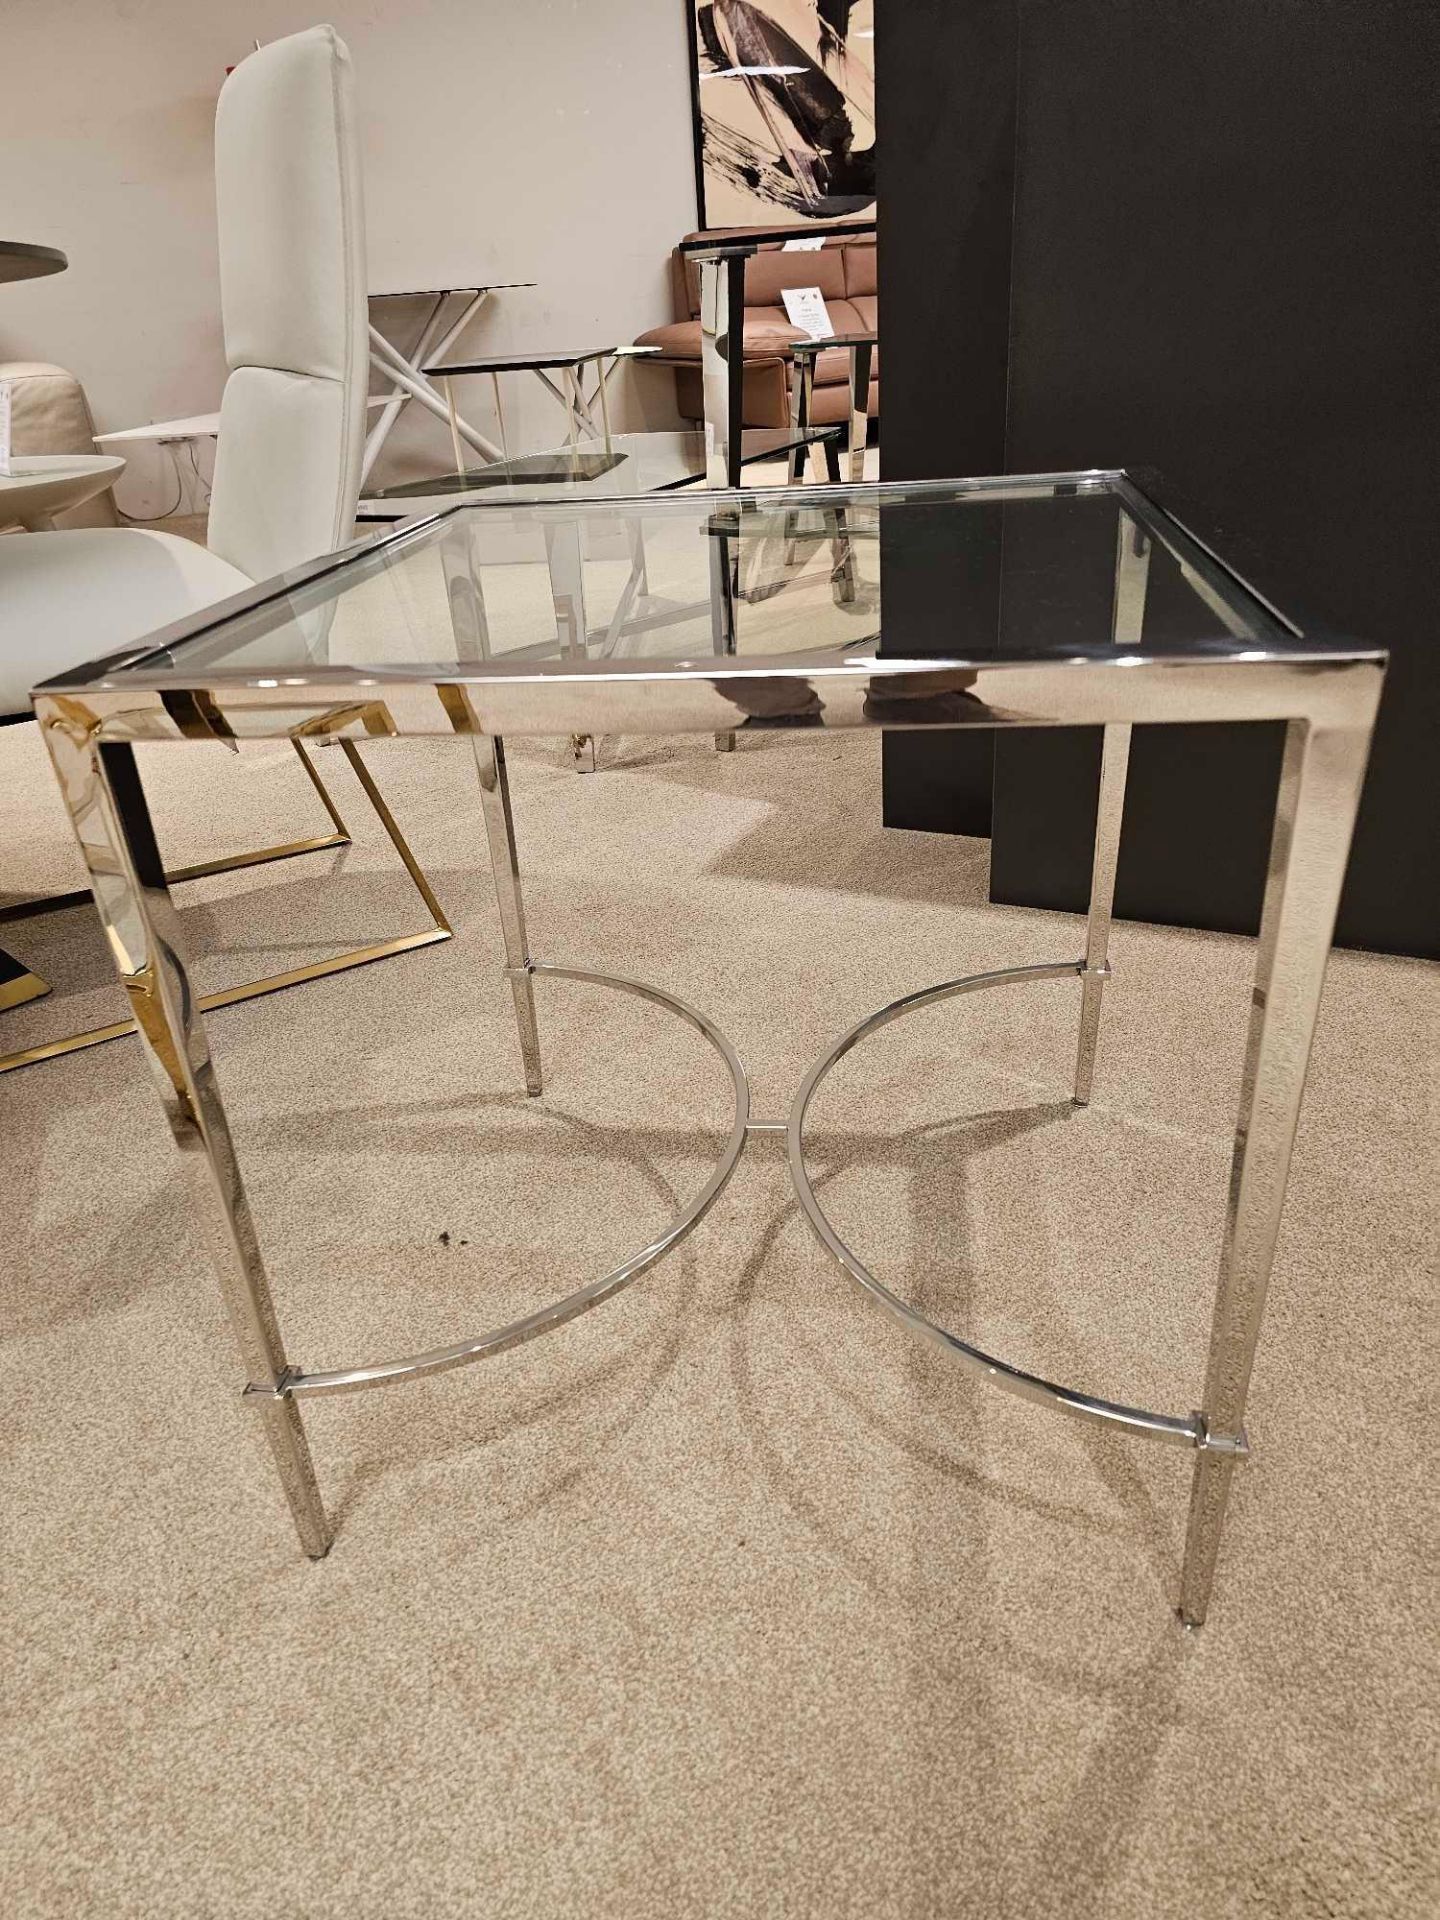 Tokyo Lamp Table by Kesterport The Tokyo lamp table with its clear glass top and a refined tapered - Image 4 of 5